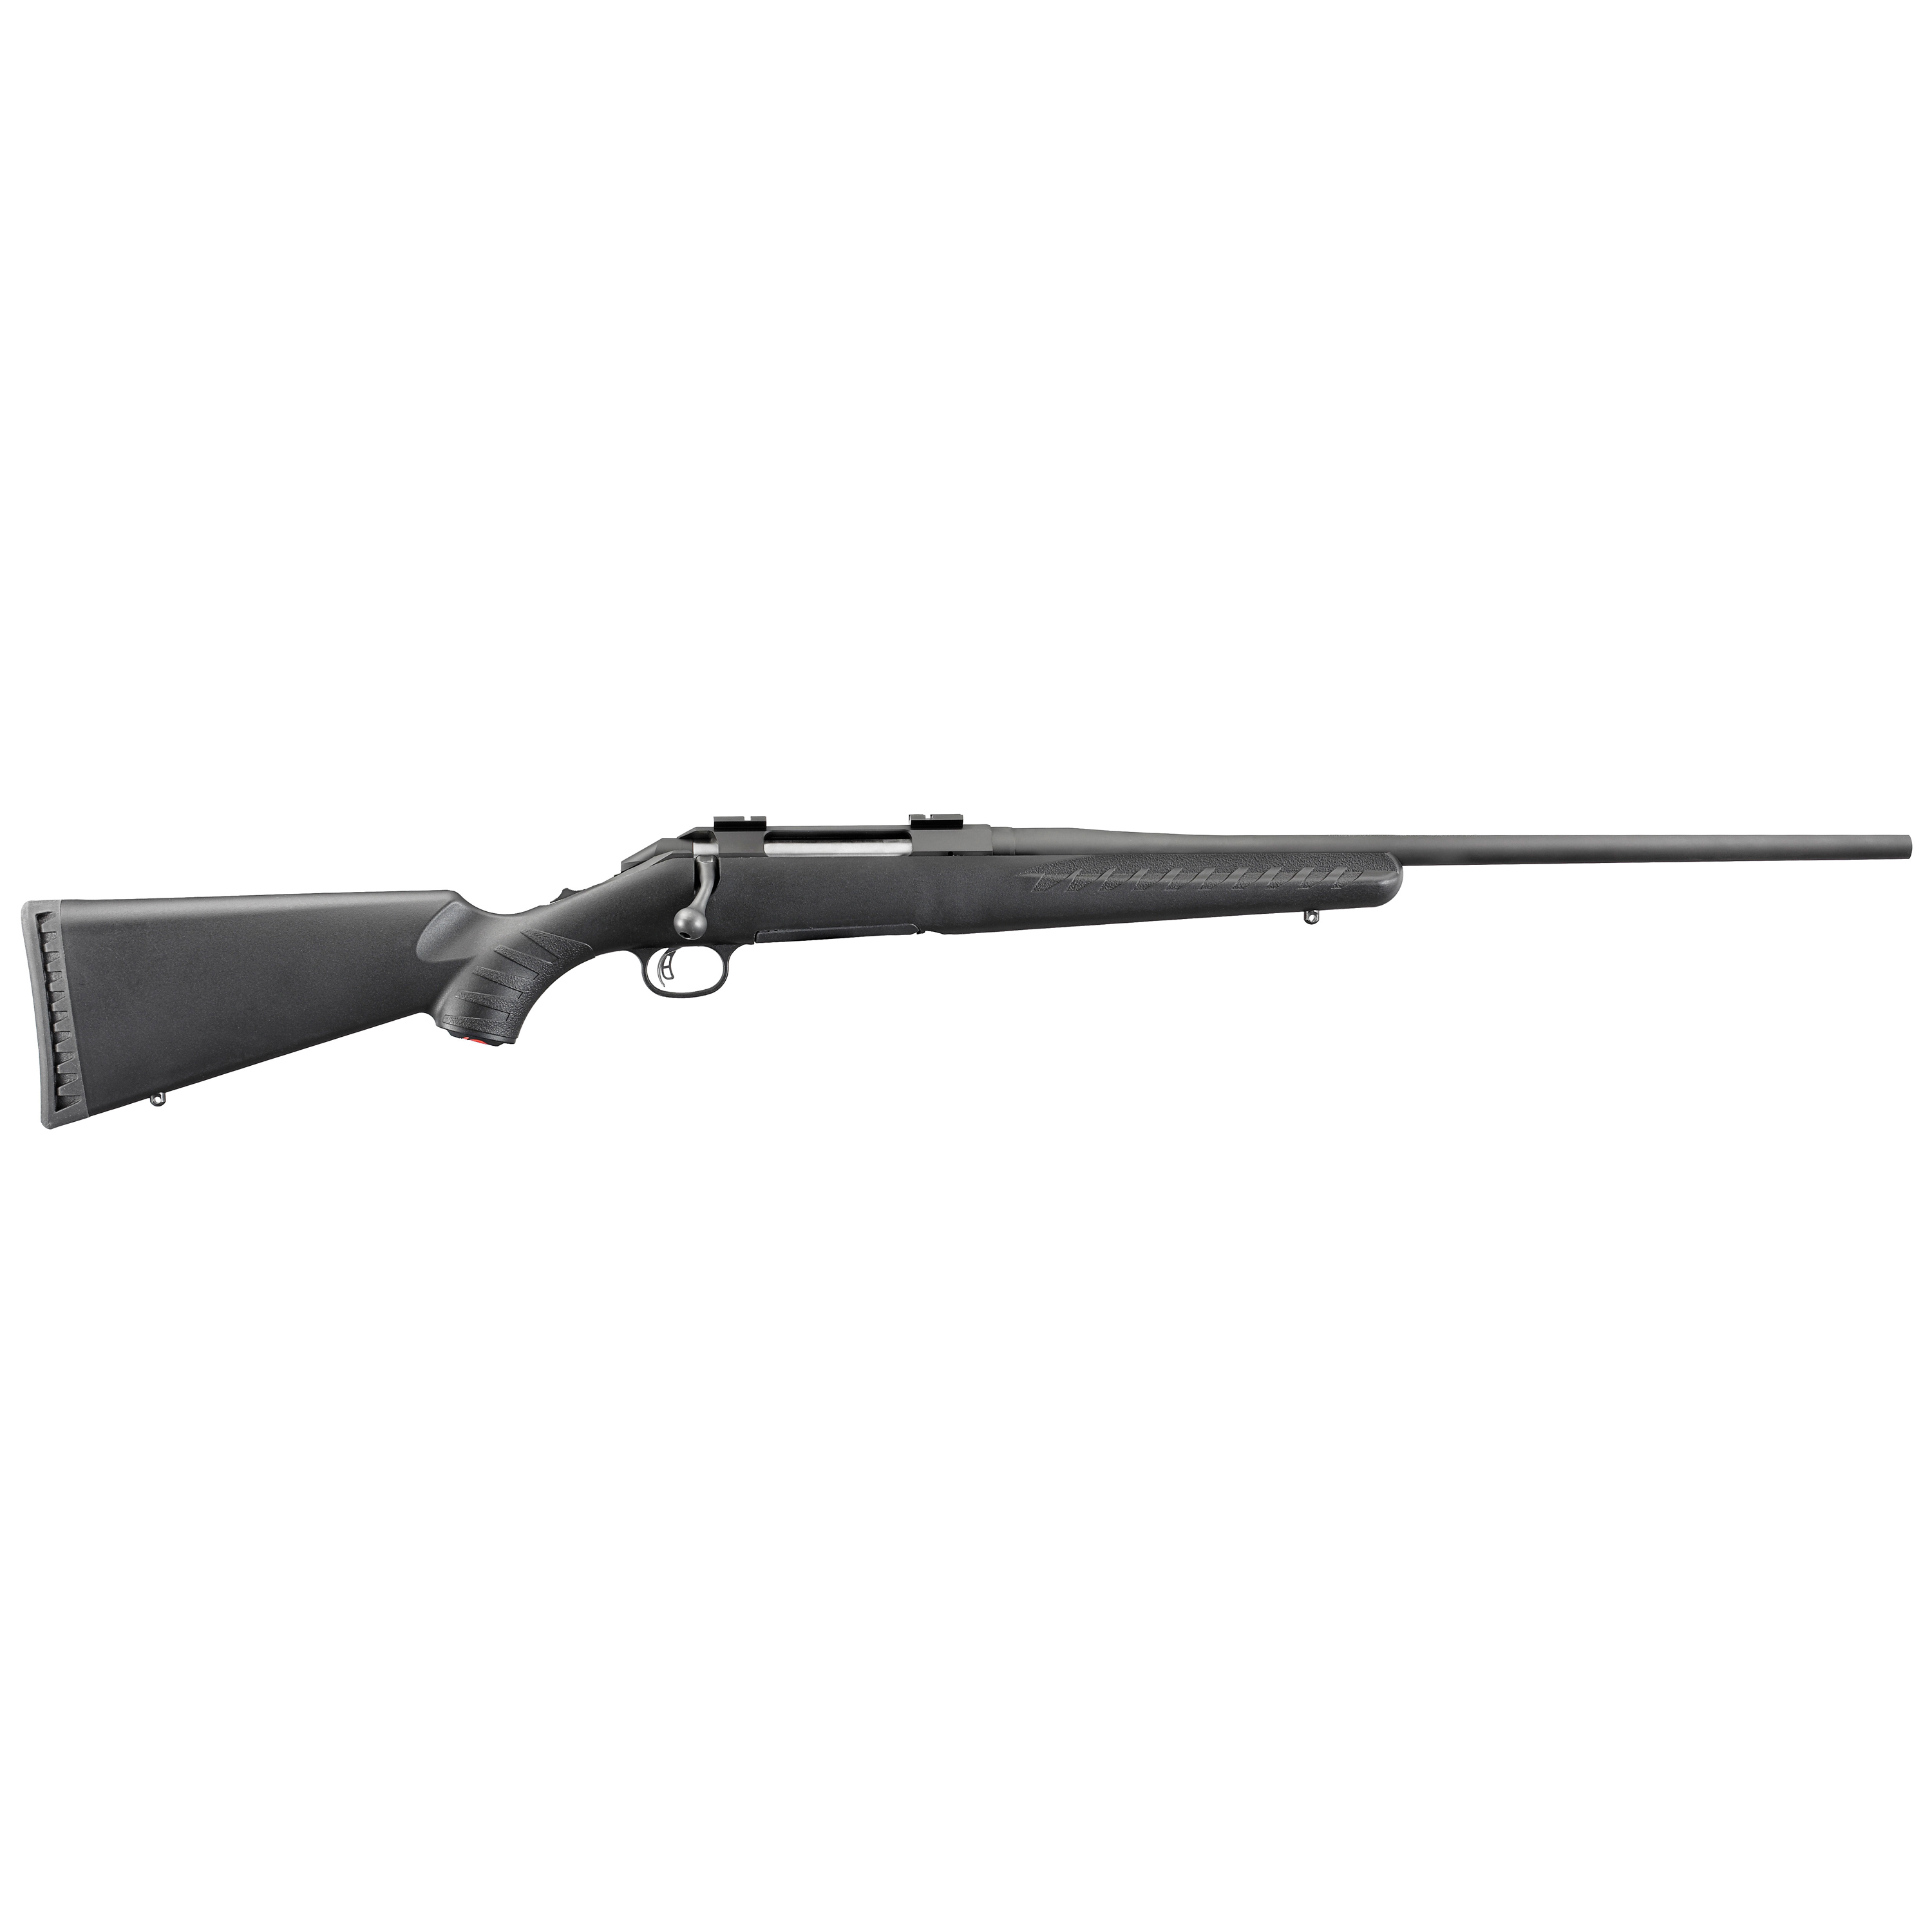 RUGER AMERICAN 30-06 22 BLK 4RD